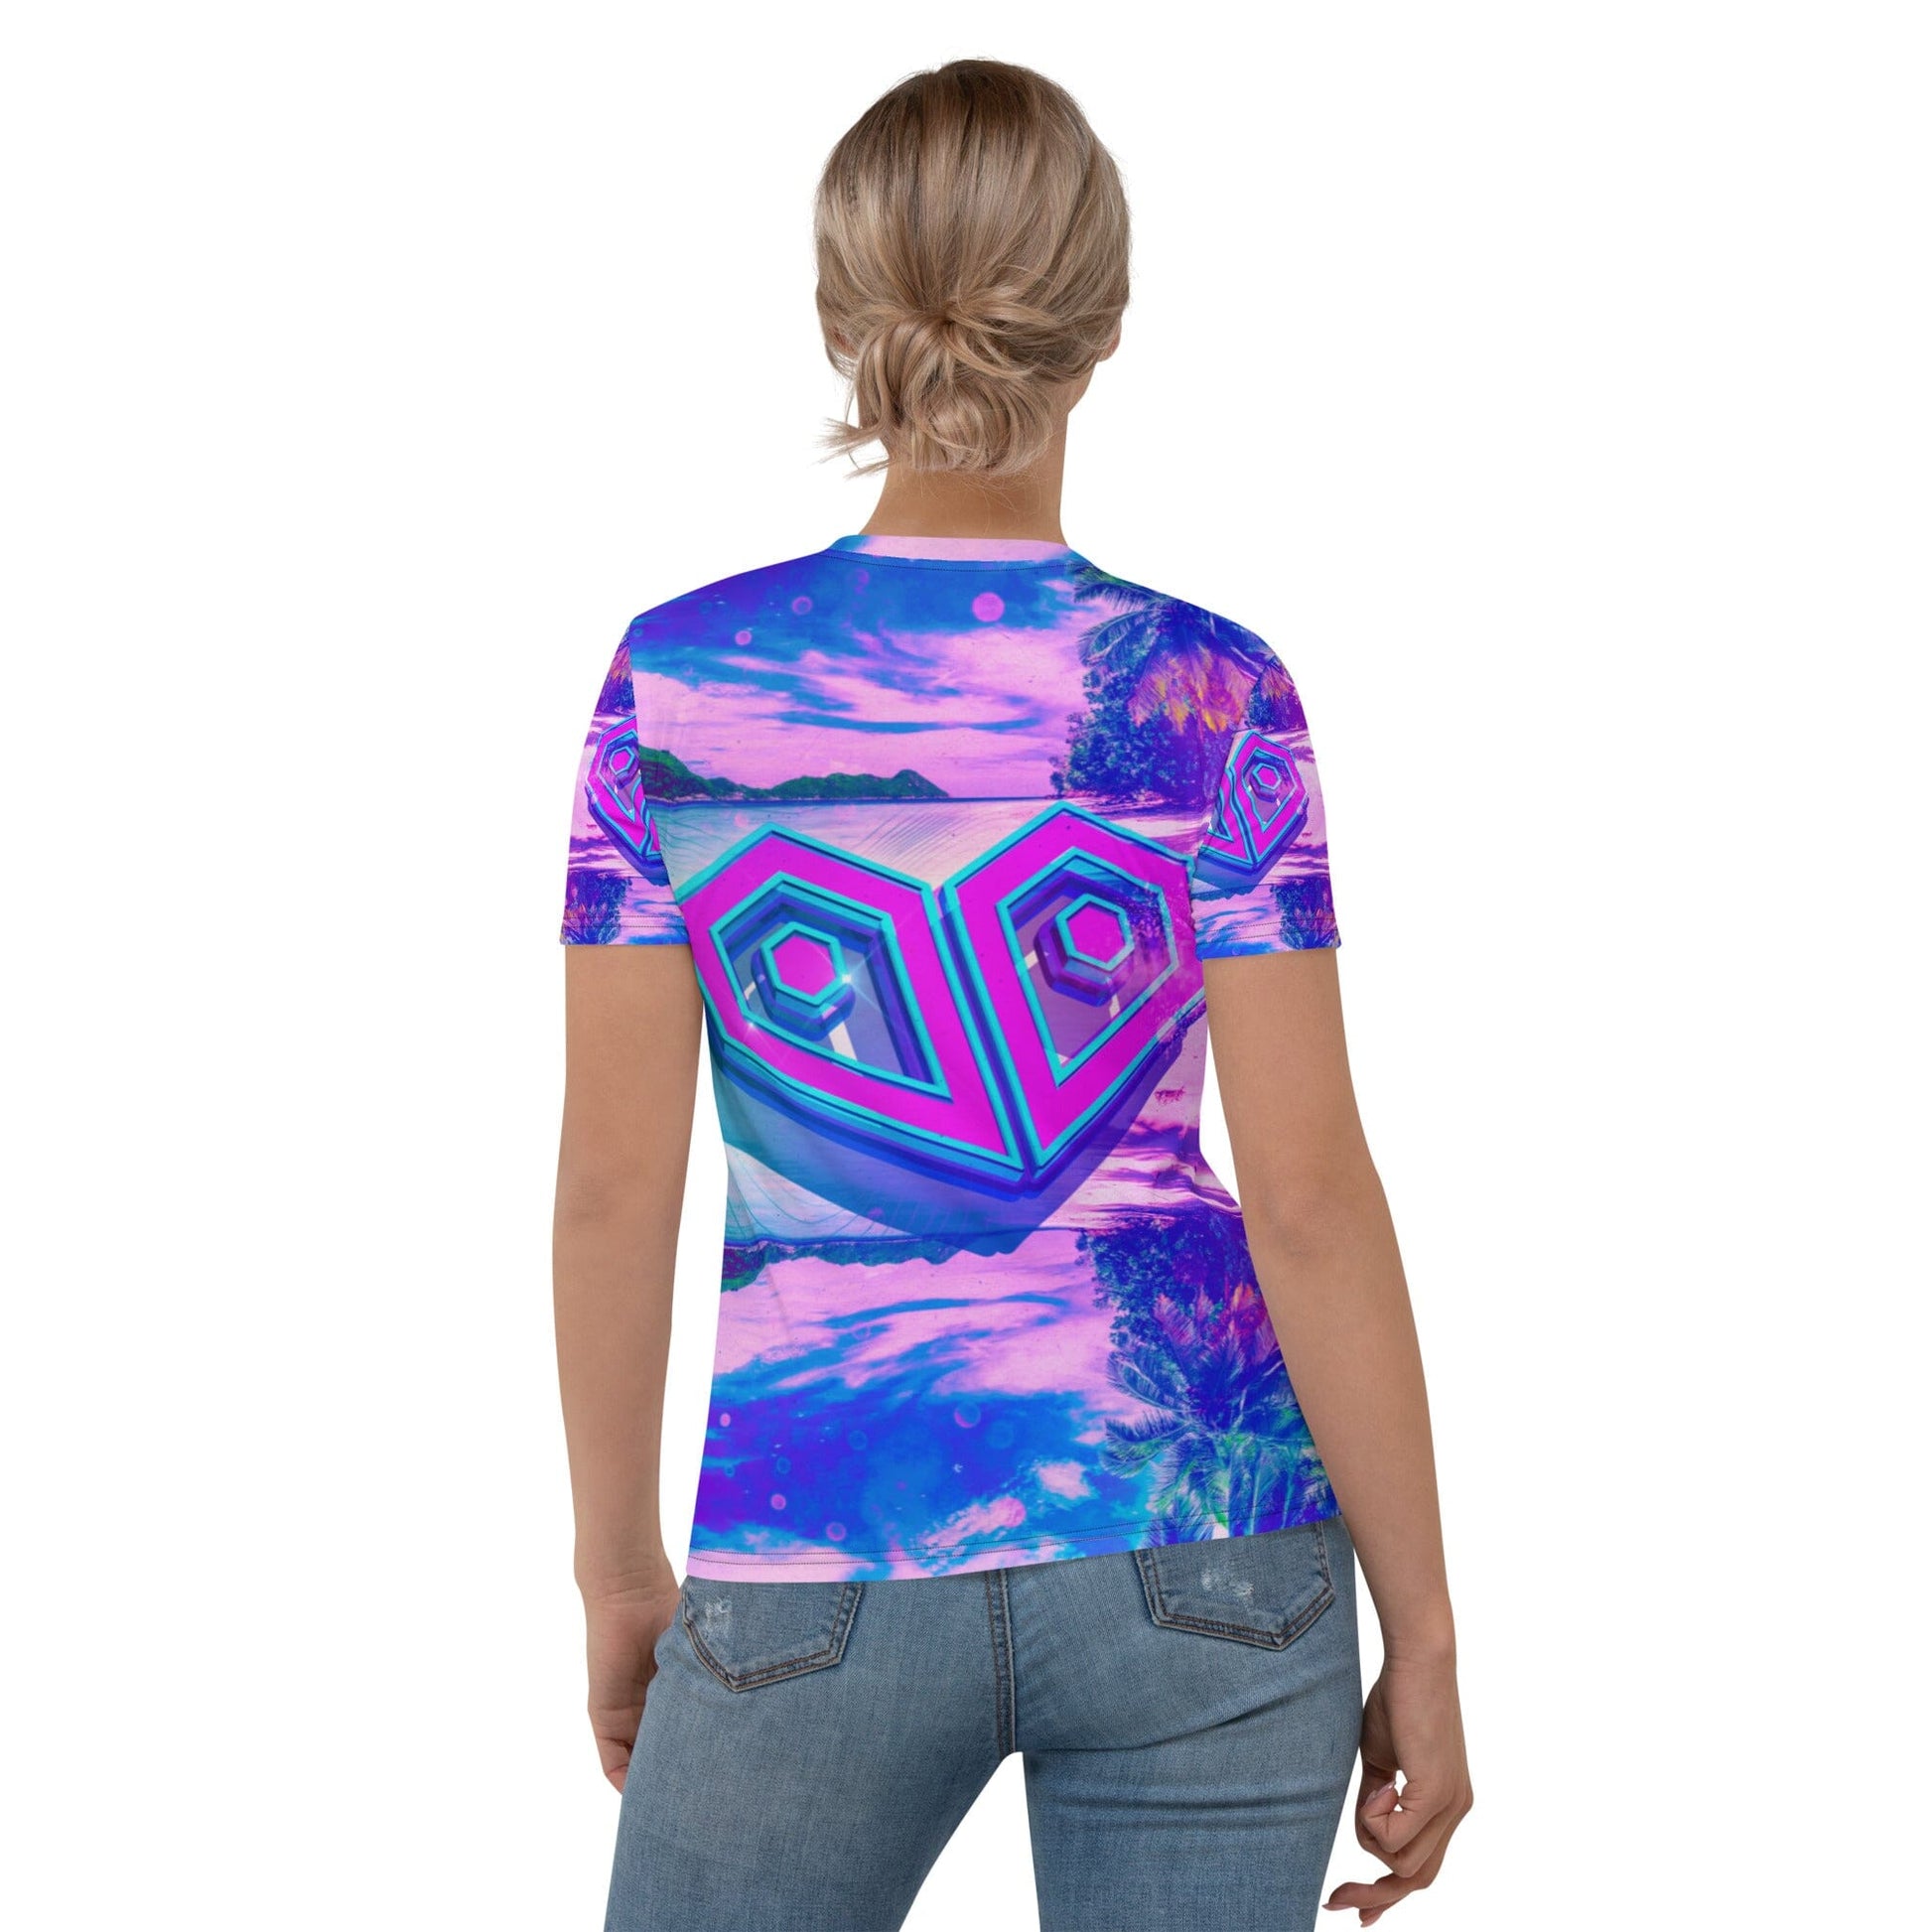 On a Different Vibe Women's T-Shirt PLURTHLINGS 